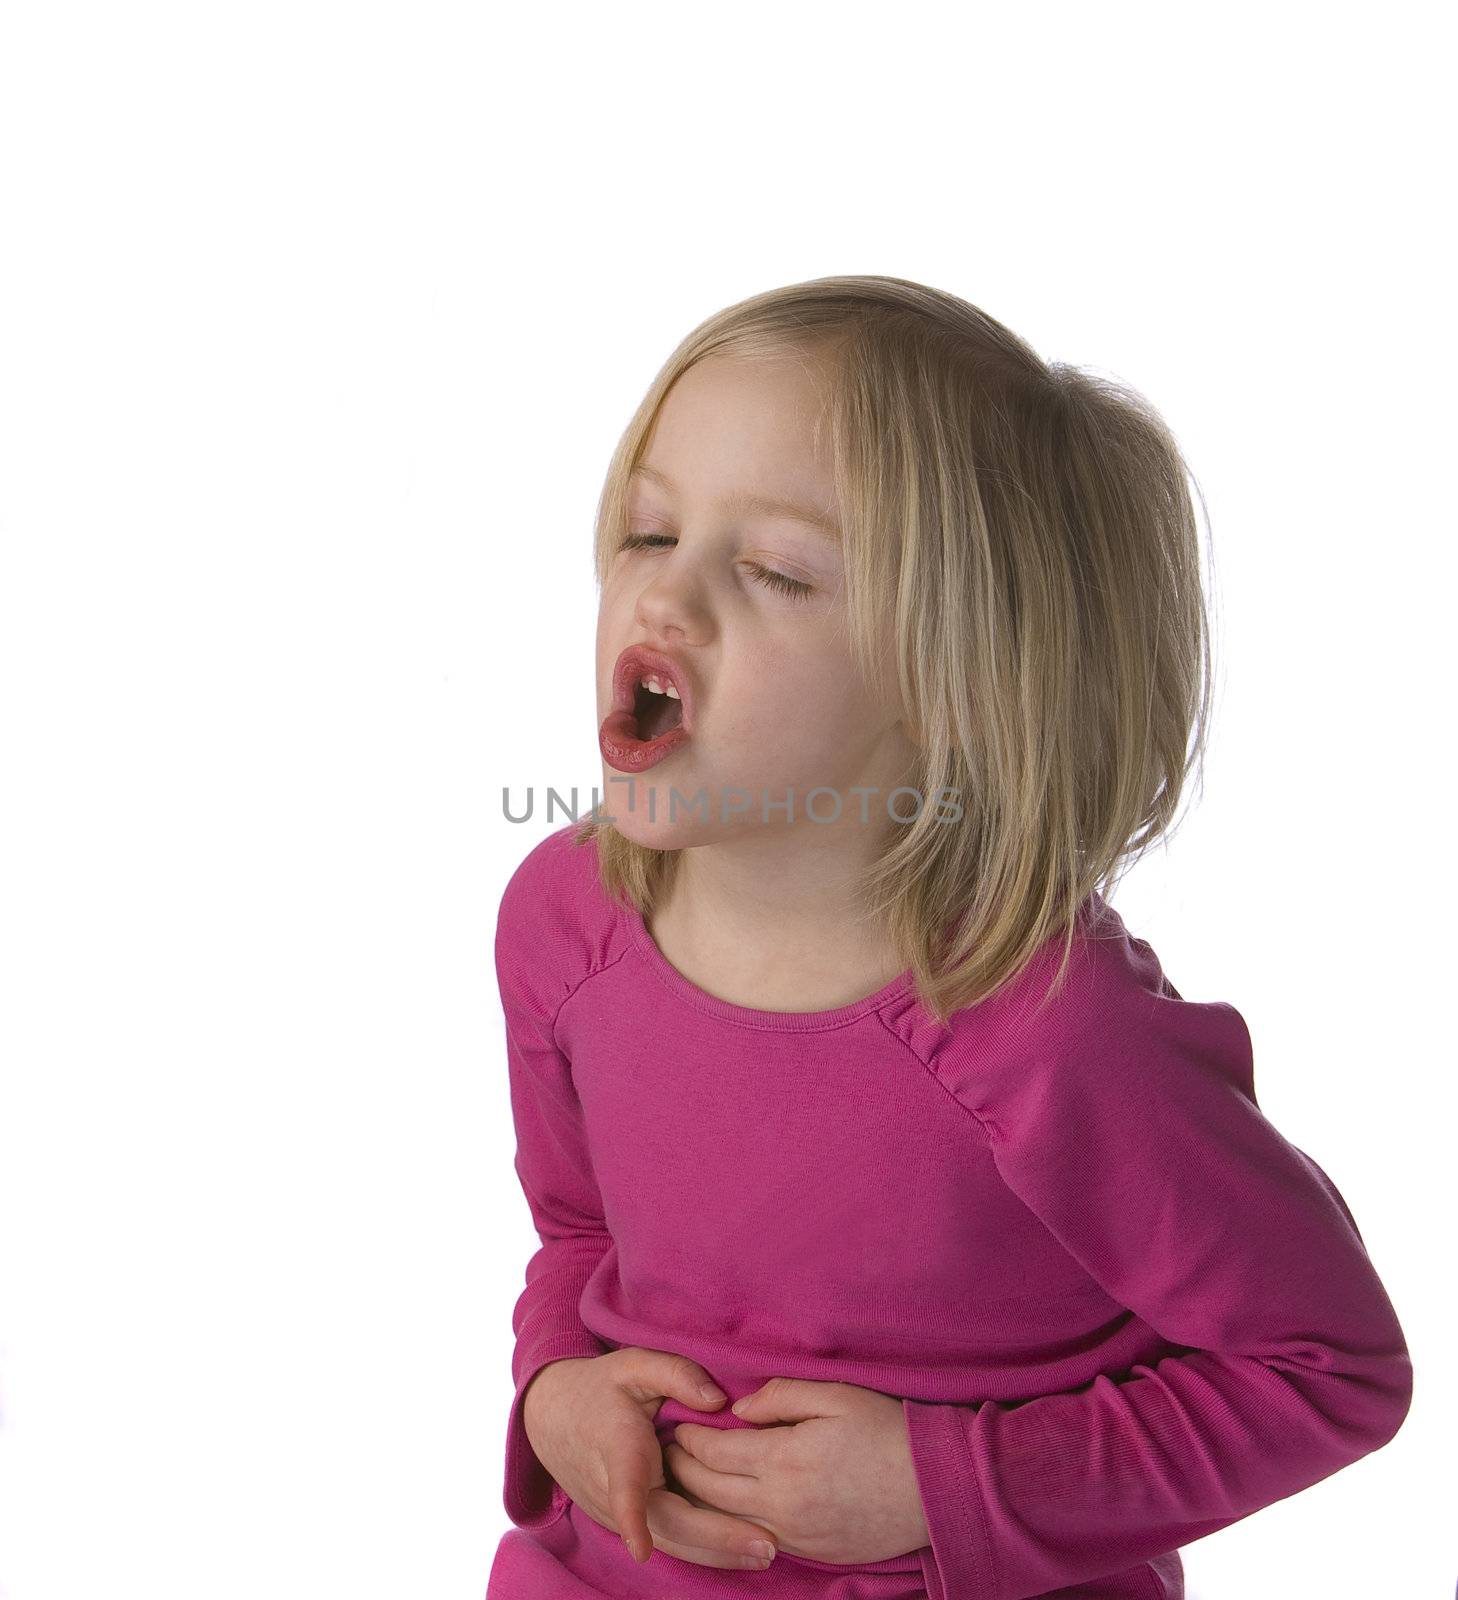 Chlid moaning with stomache ache on a white background